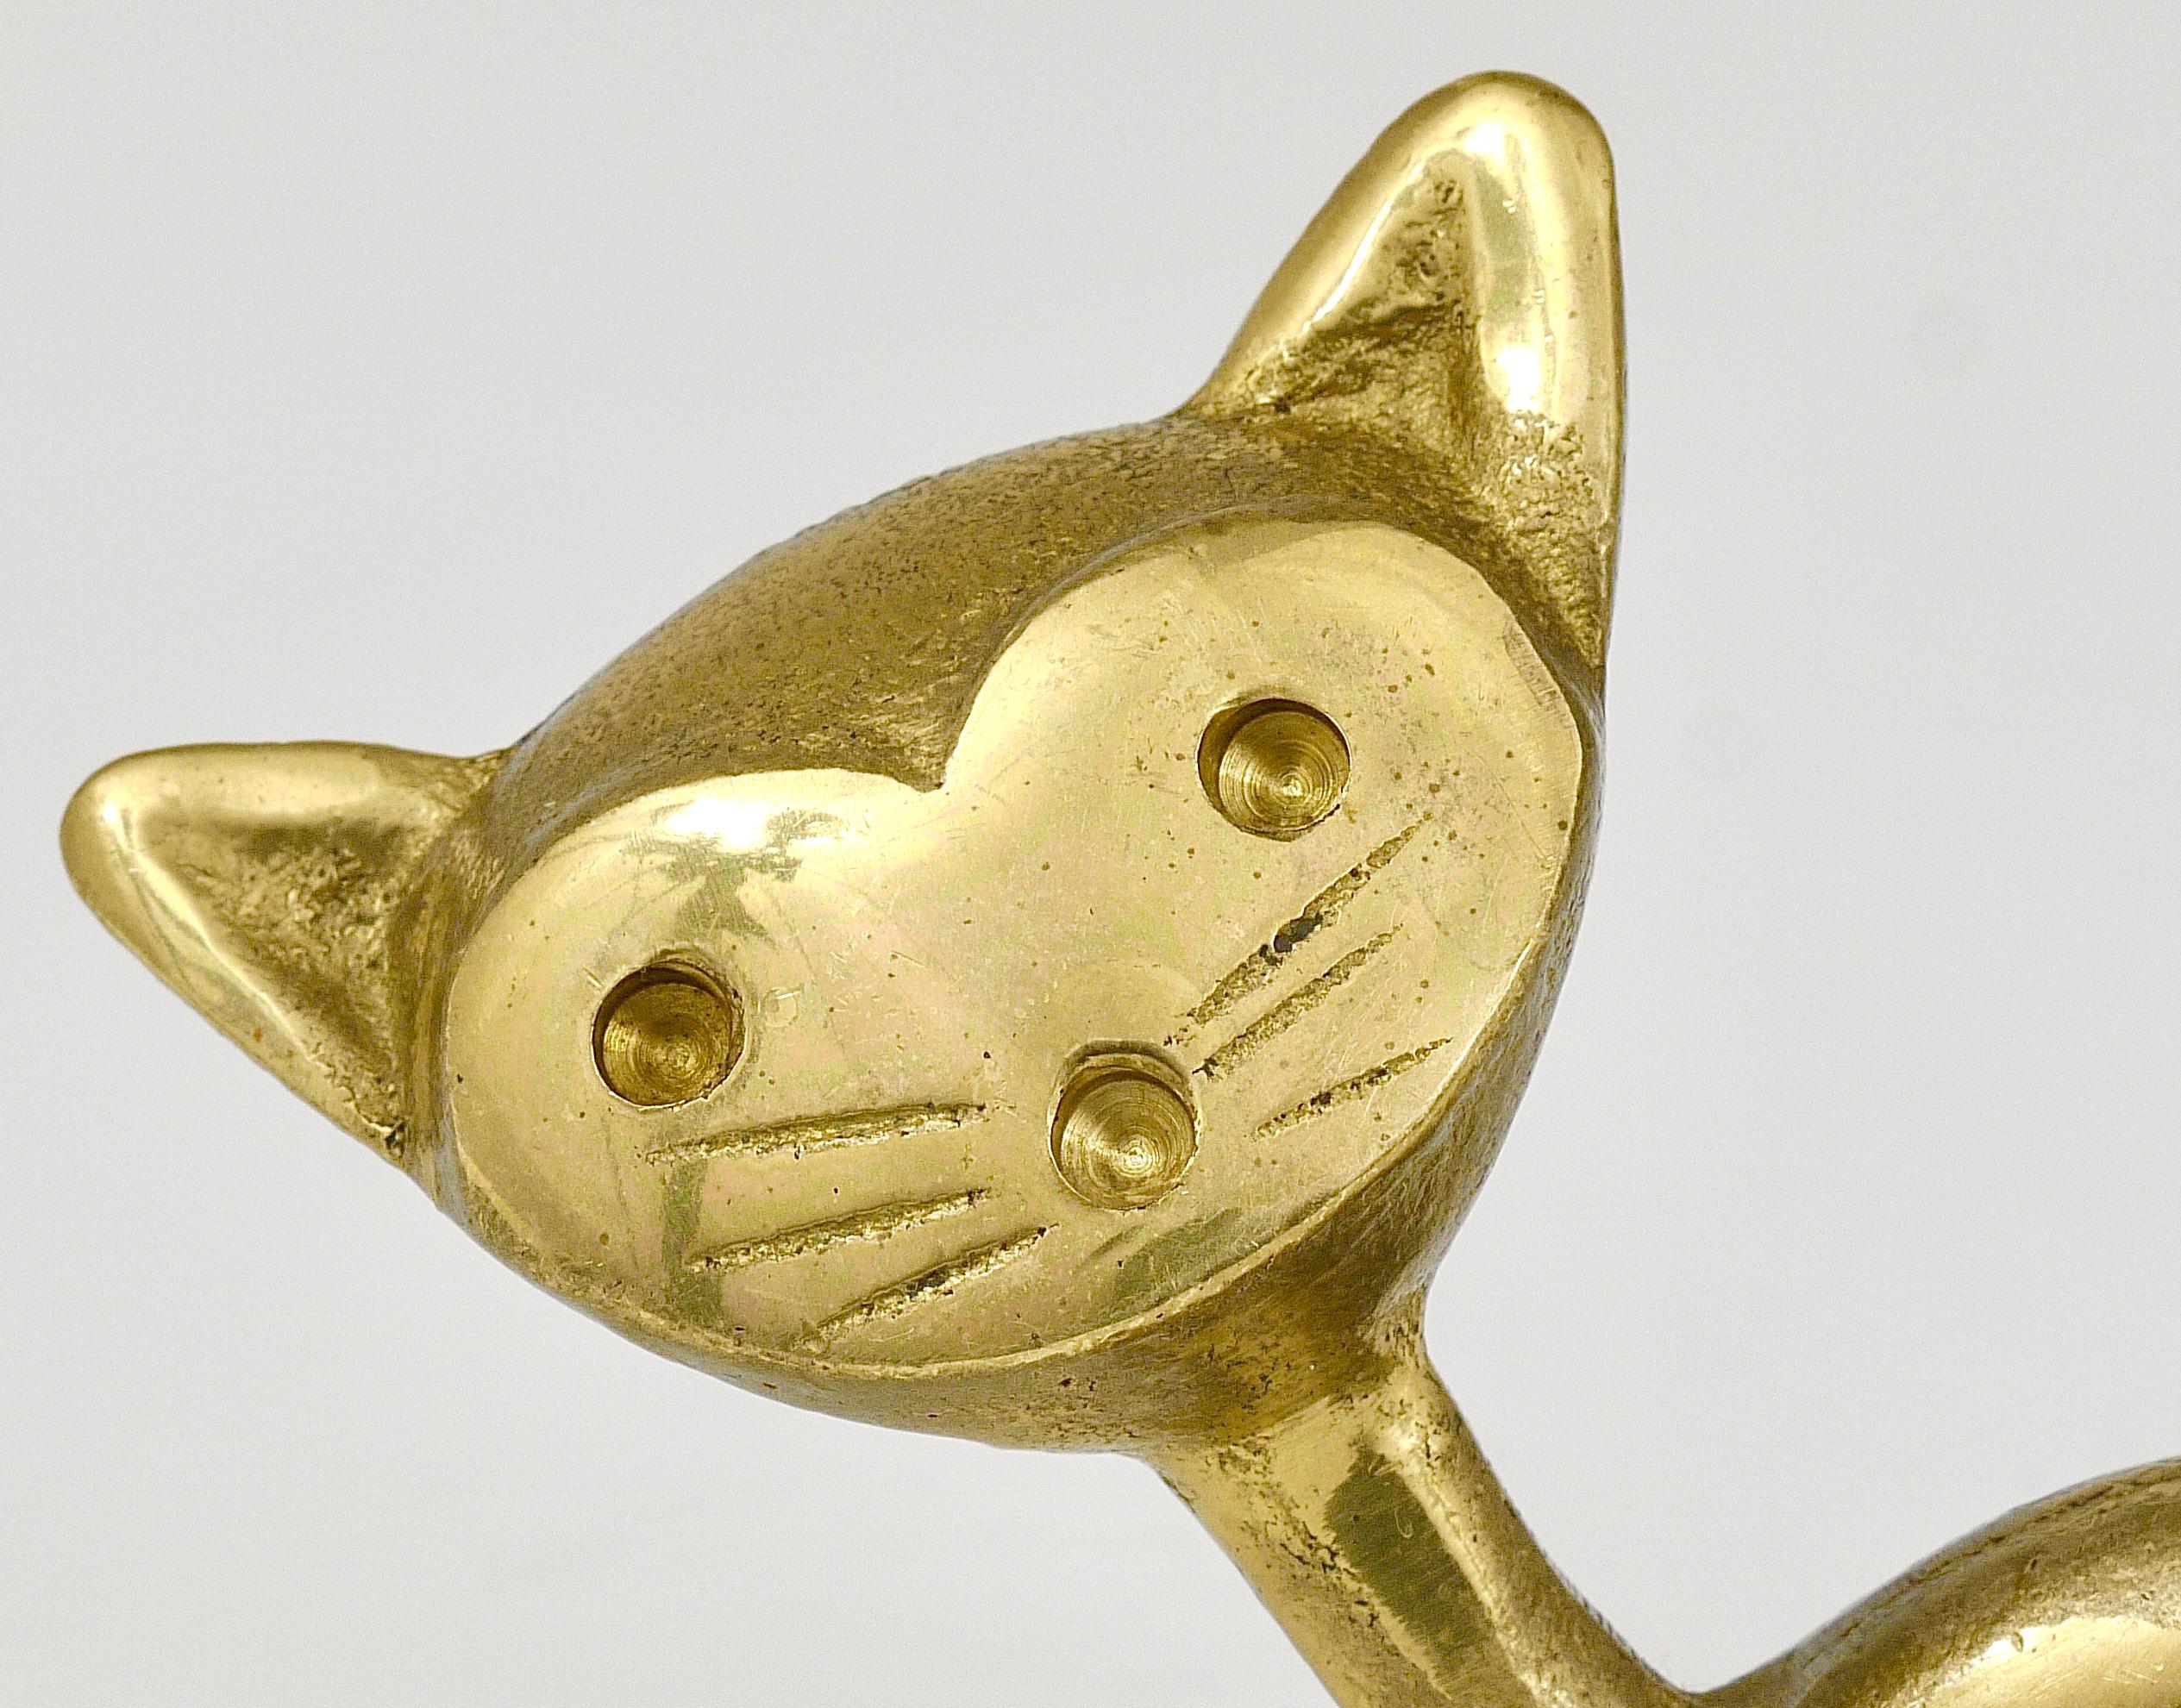 A very charming Austrian midcentury pen or pencil holder, displaying a cat. A very humorous design by Walter Bosse executed by Hertha Baller Austria in the 1950s. Made of brass in very good condition with charming patina.